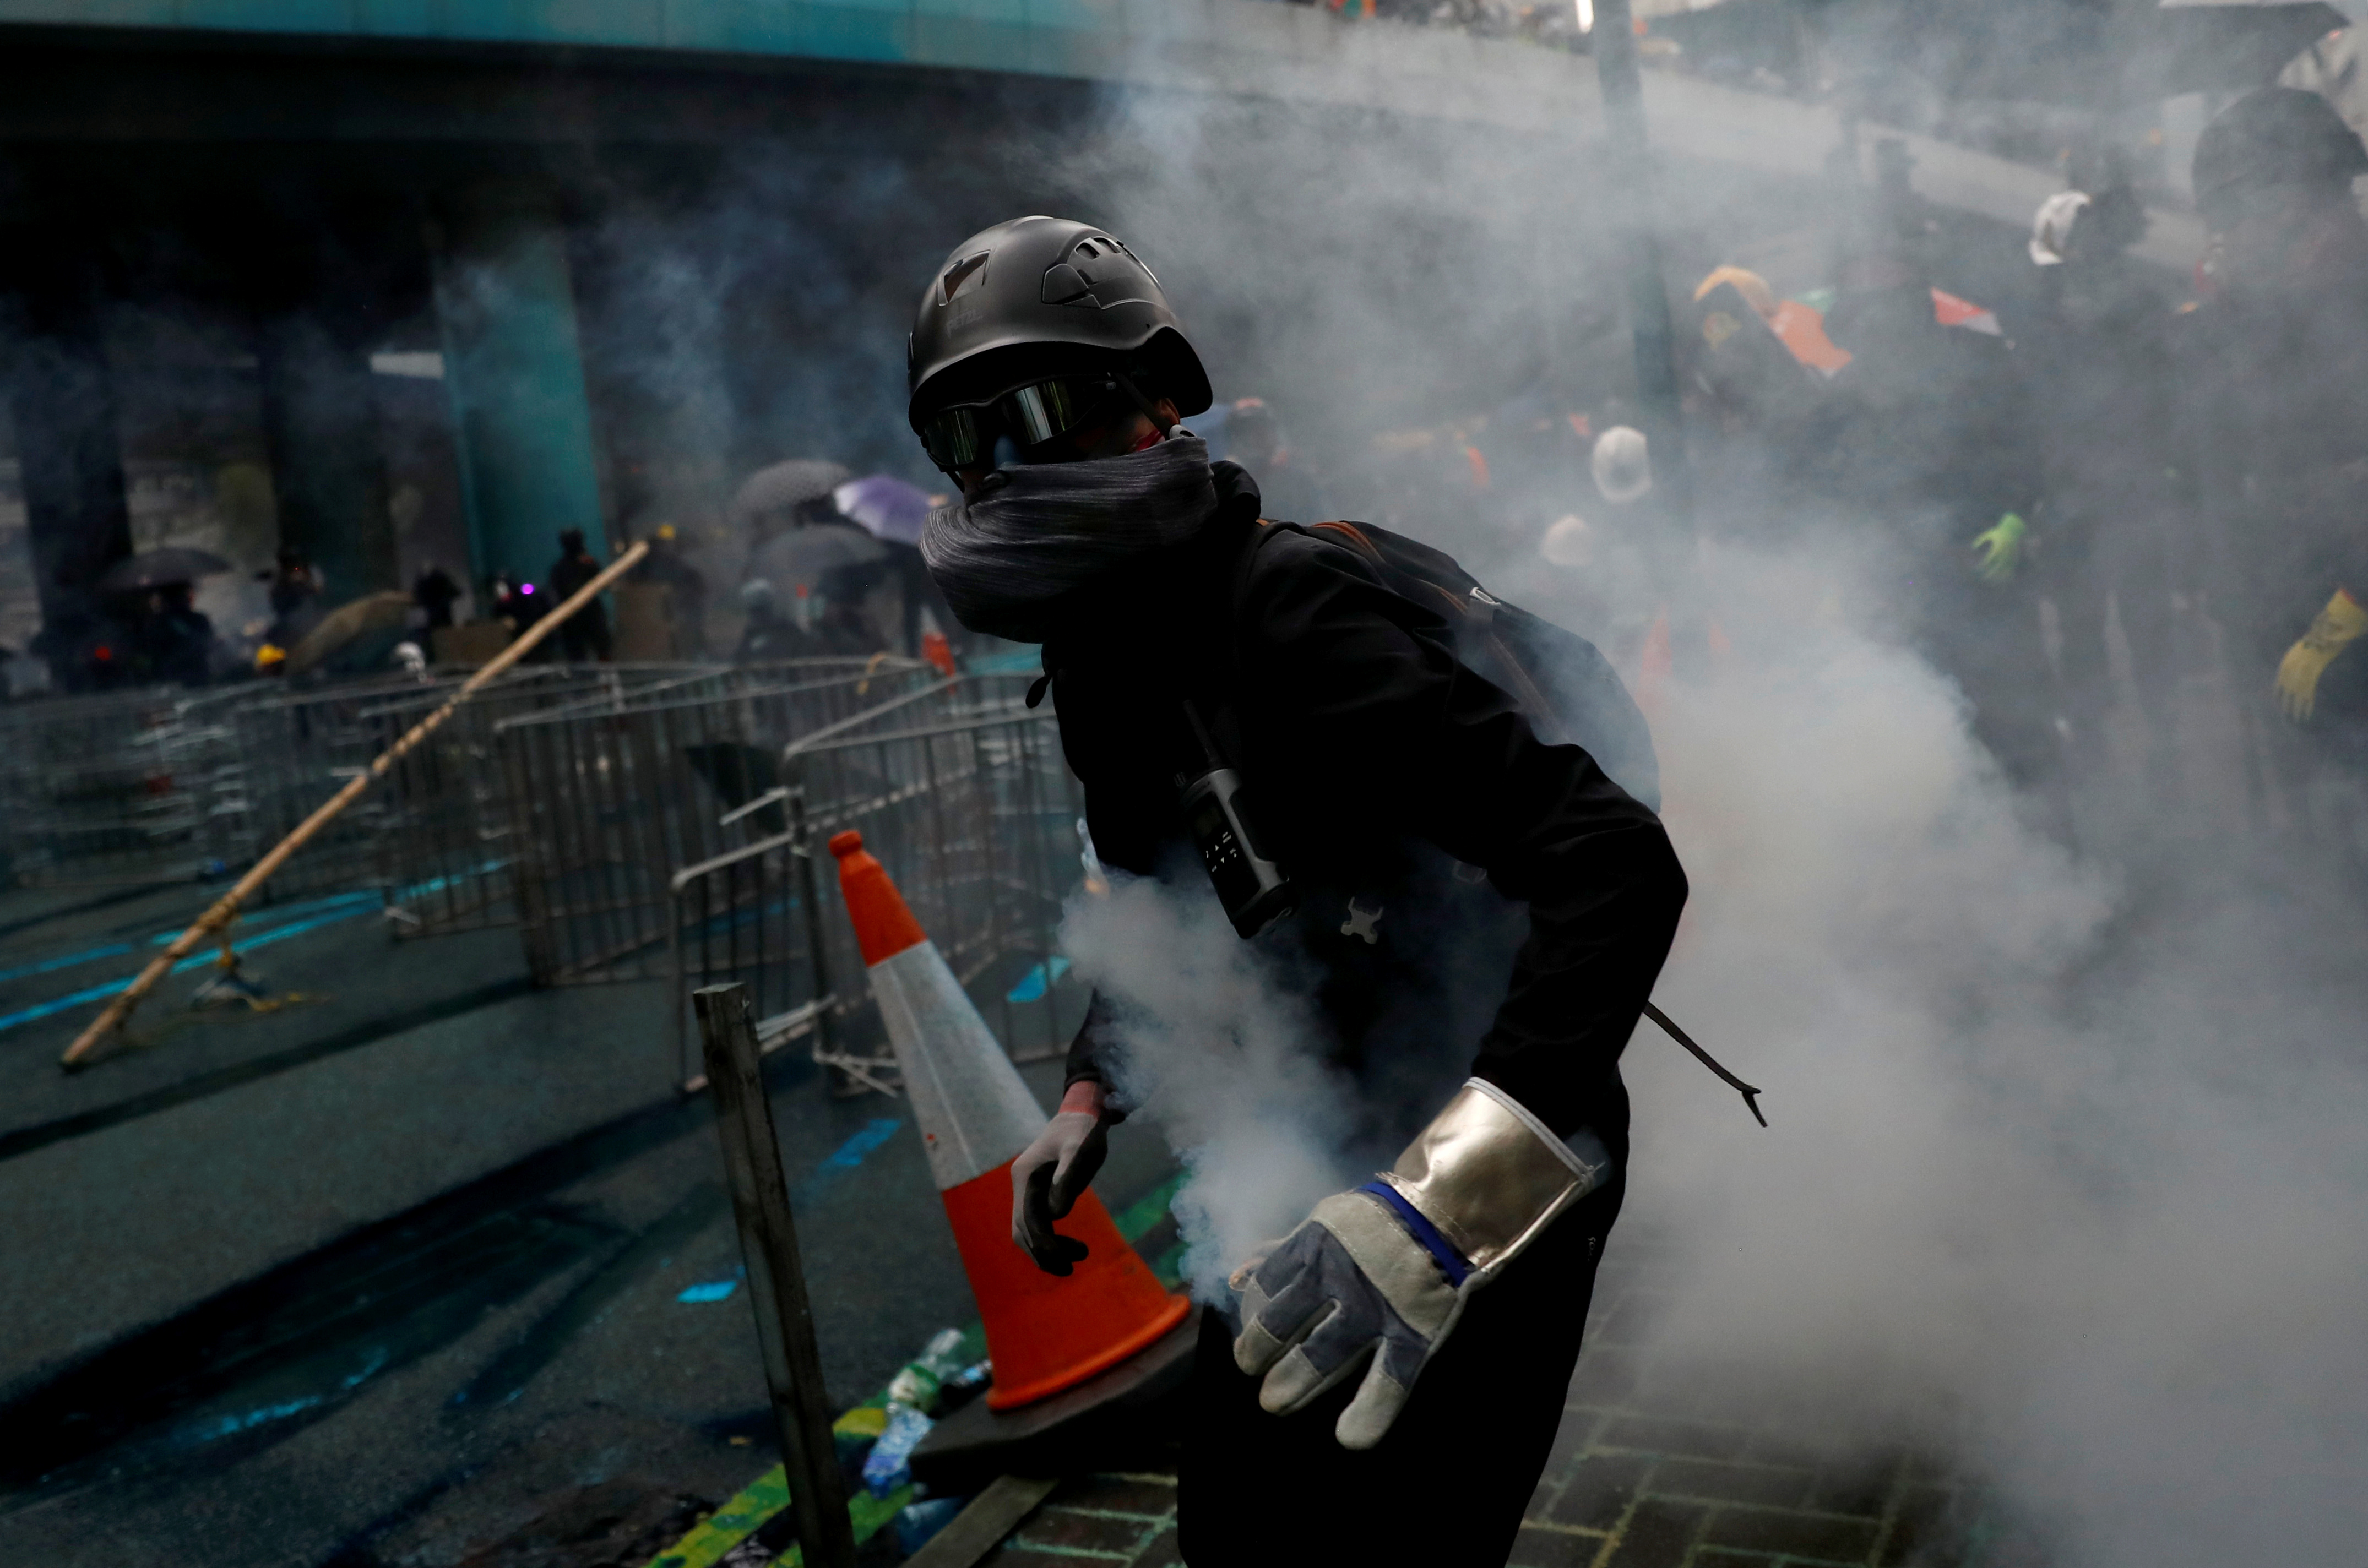 A demonstrator attends a protest in Hong Kong